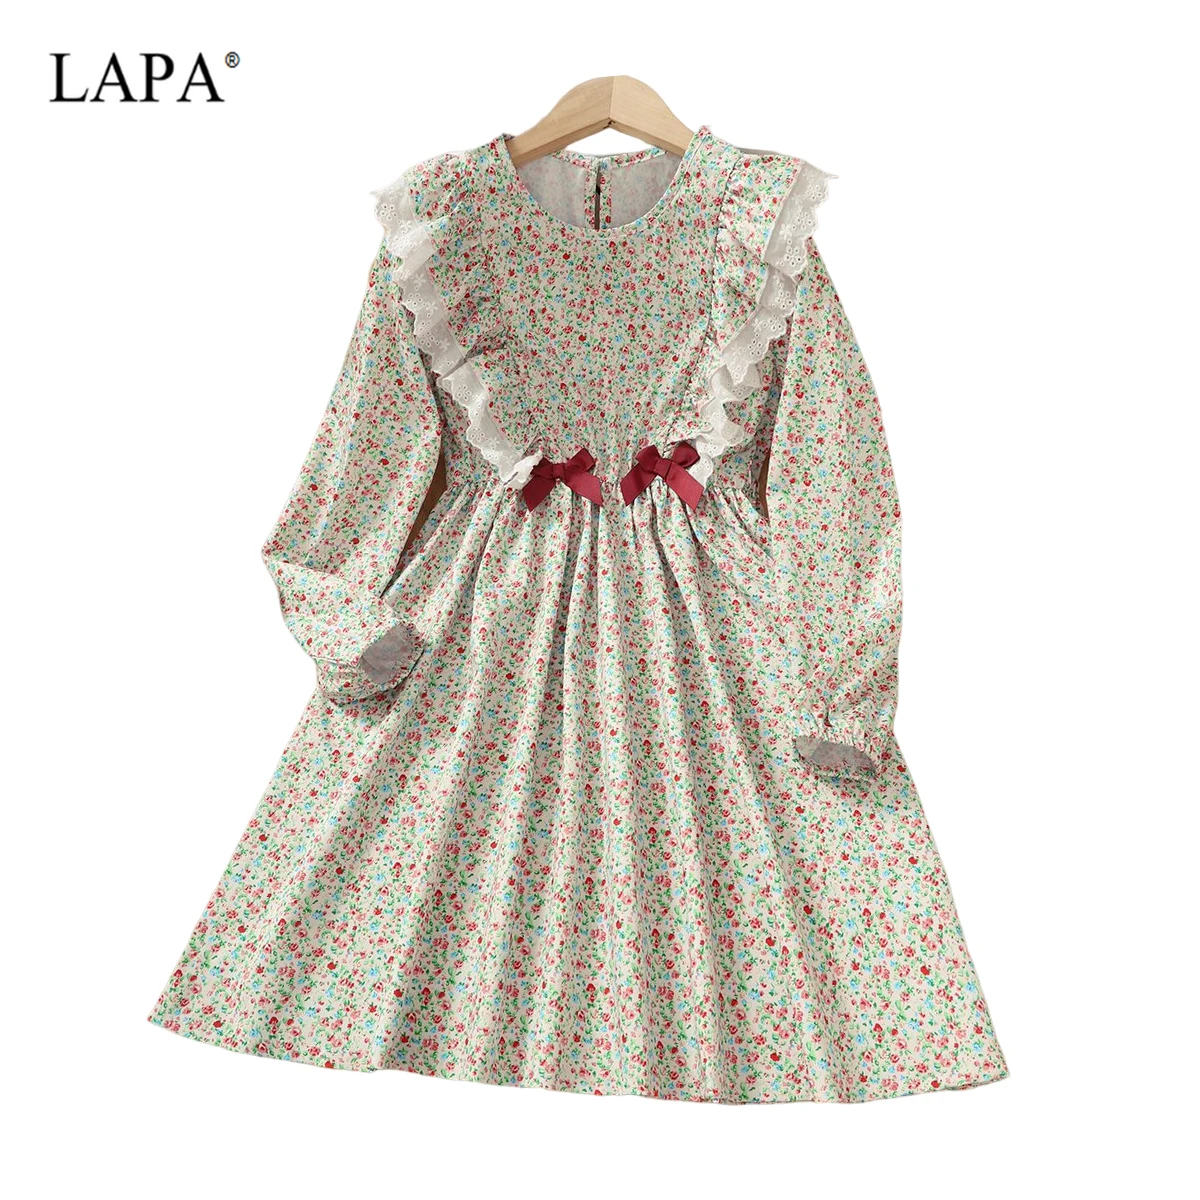 

LAPA 4 to 12 Years Girls Dresses Long Sleeve Crew neck Floral Jumper Dress All Seasons Spring/Autumn Dress